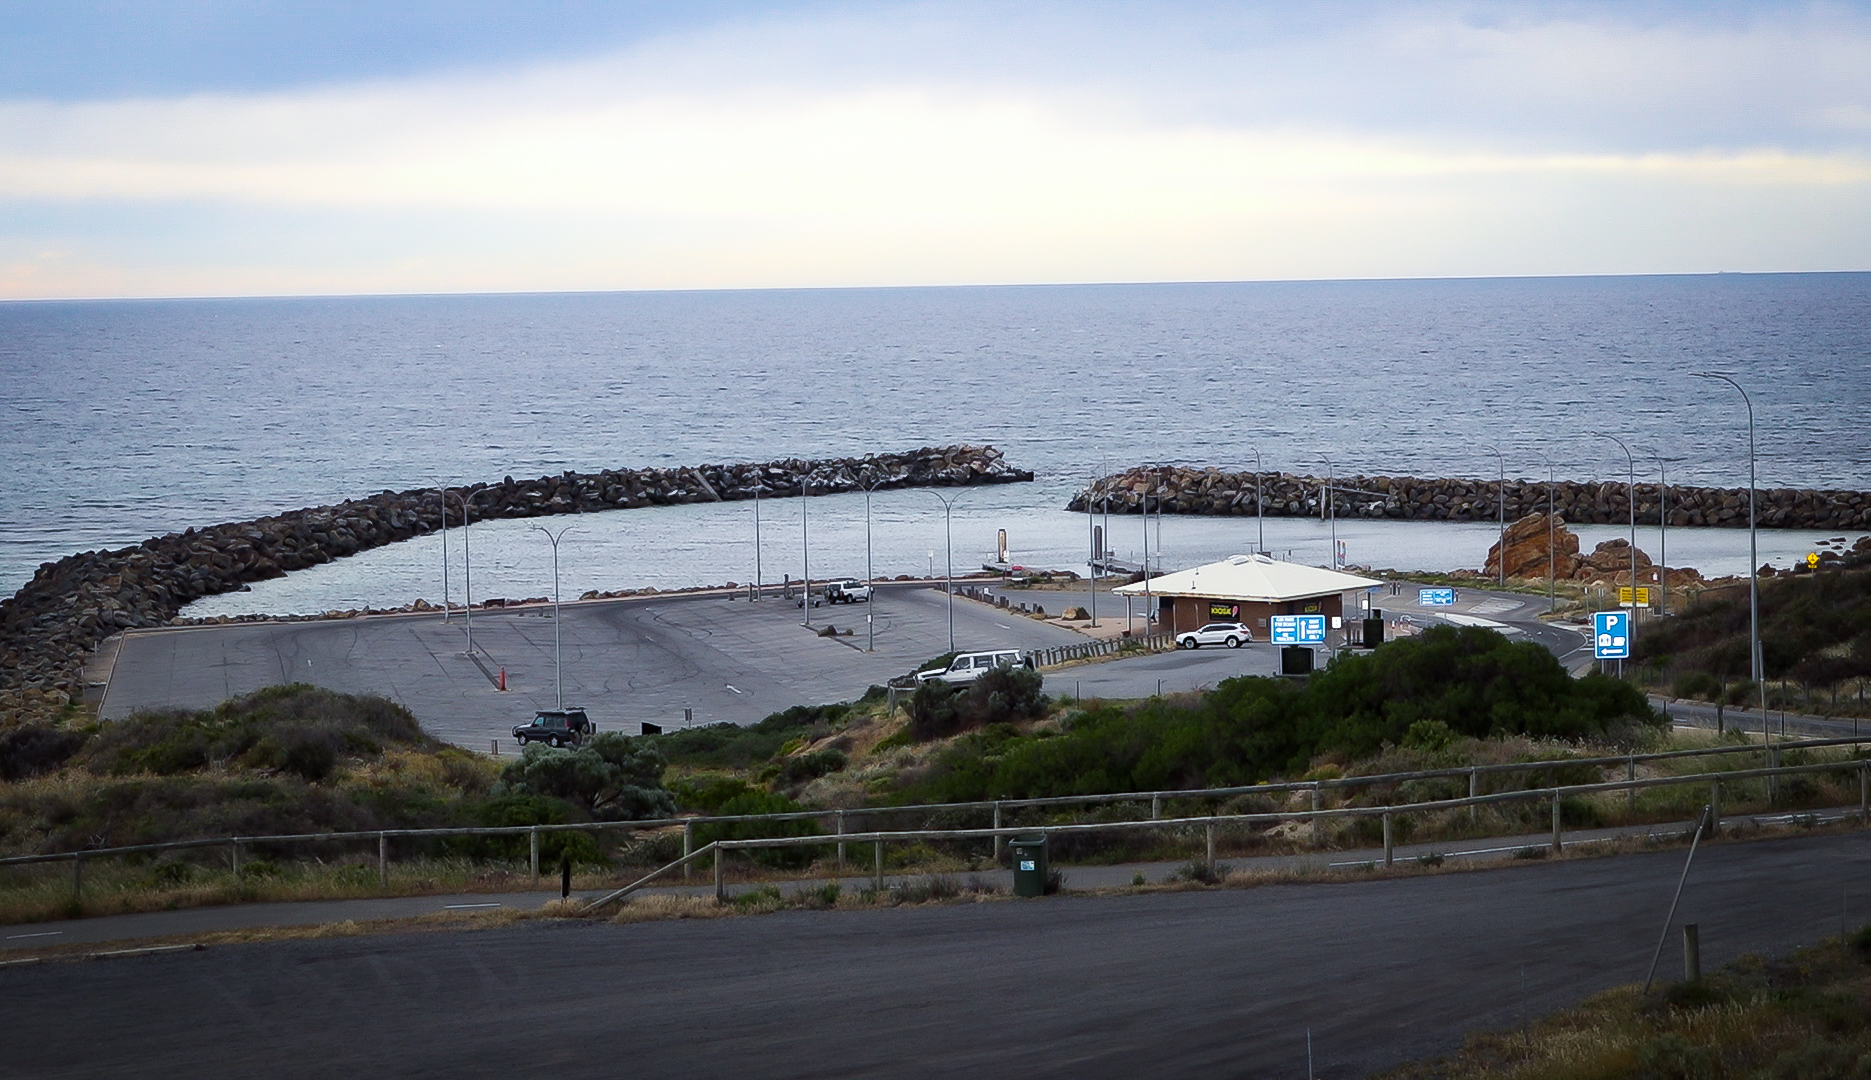 A view of the O'Sullivan Beach car park, kiosk and boat ramp, taken from a hill.